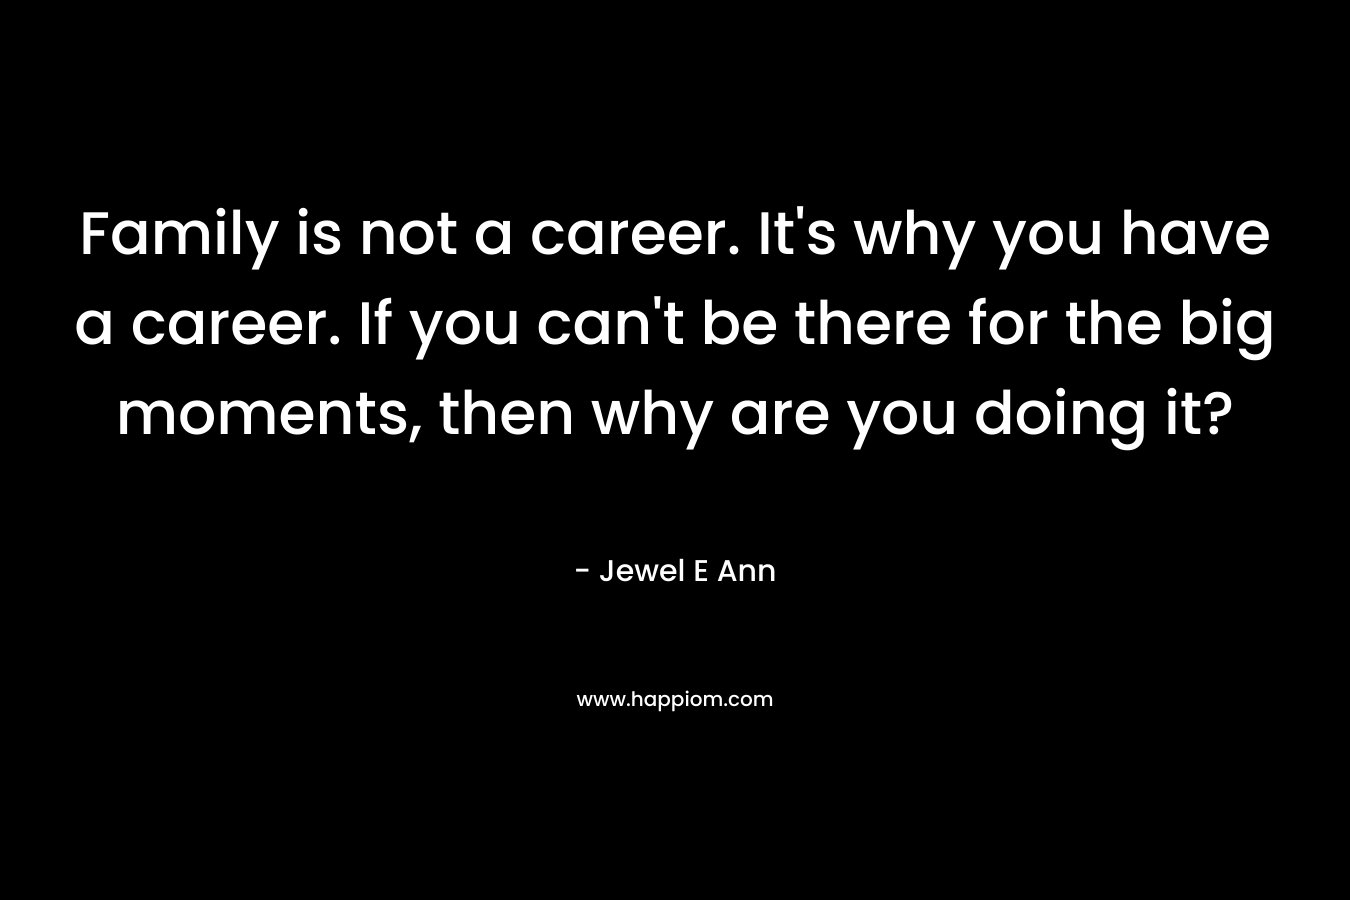 Family is not a career. It's why you have a career. If you can't be there for the big moments, then why are you doing it?